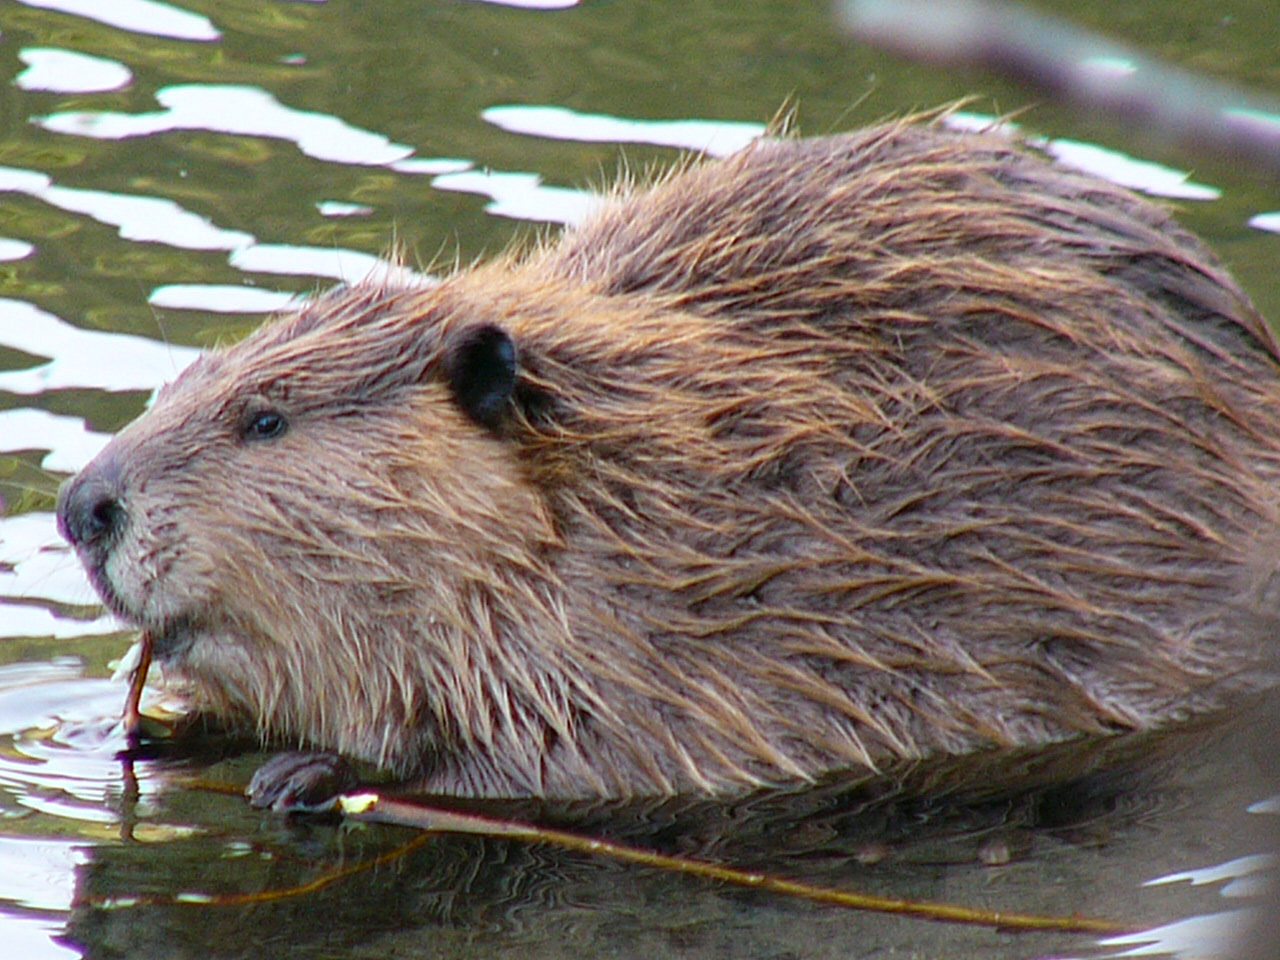 Beavers like this one were once captured in Cordova and released in Kodiak, to establish a population there. Photo by Frank Zmuda, Alaska Department of Fish and Game